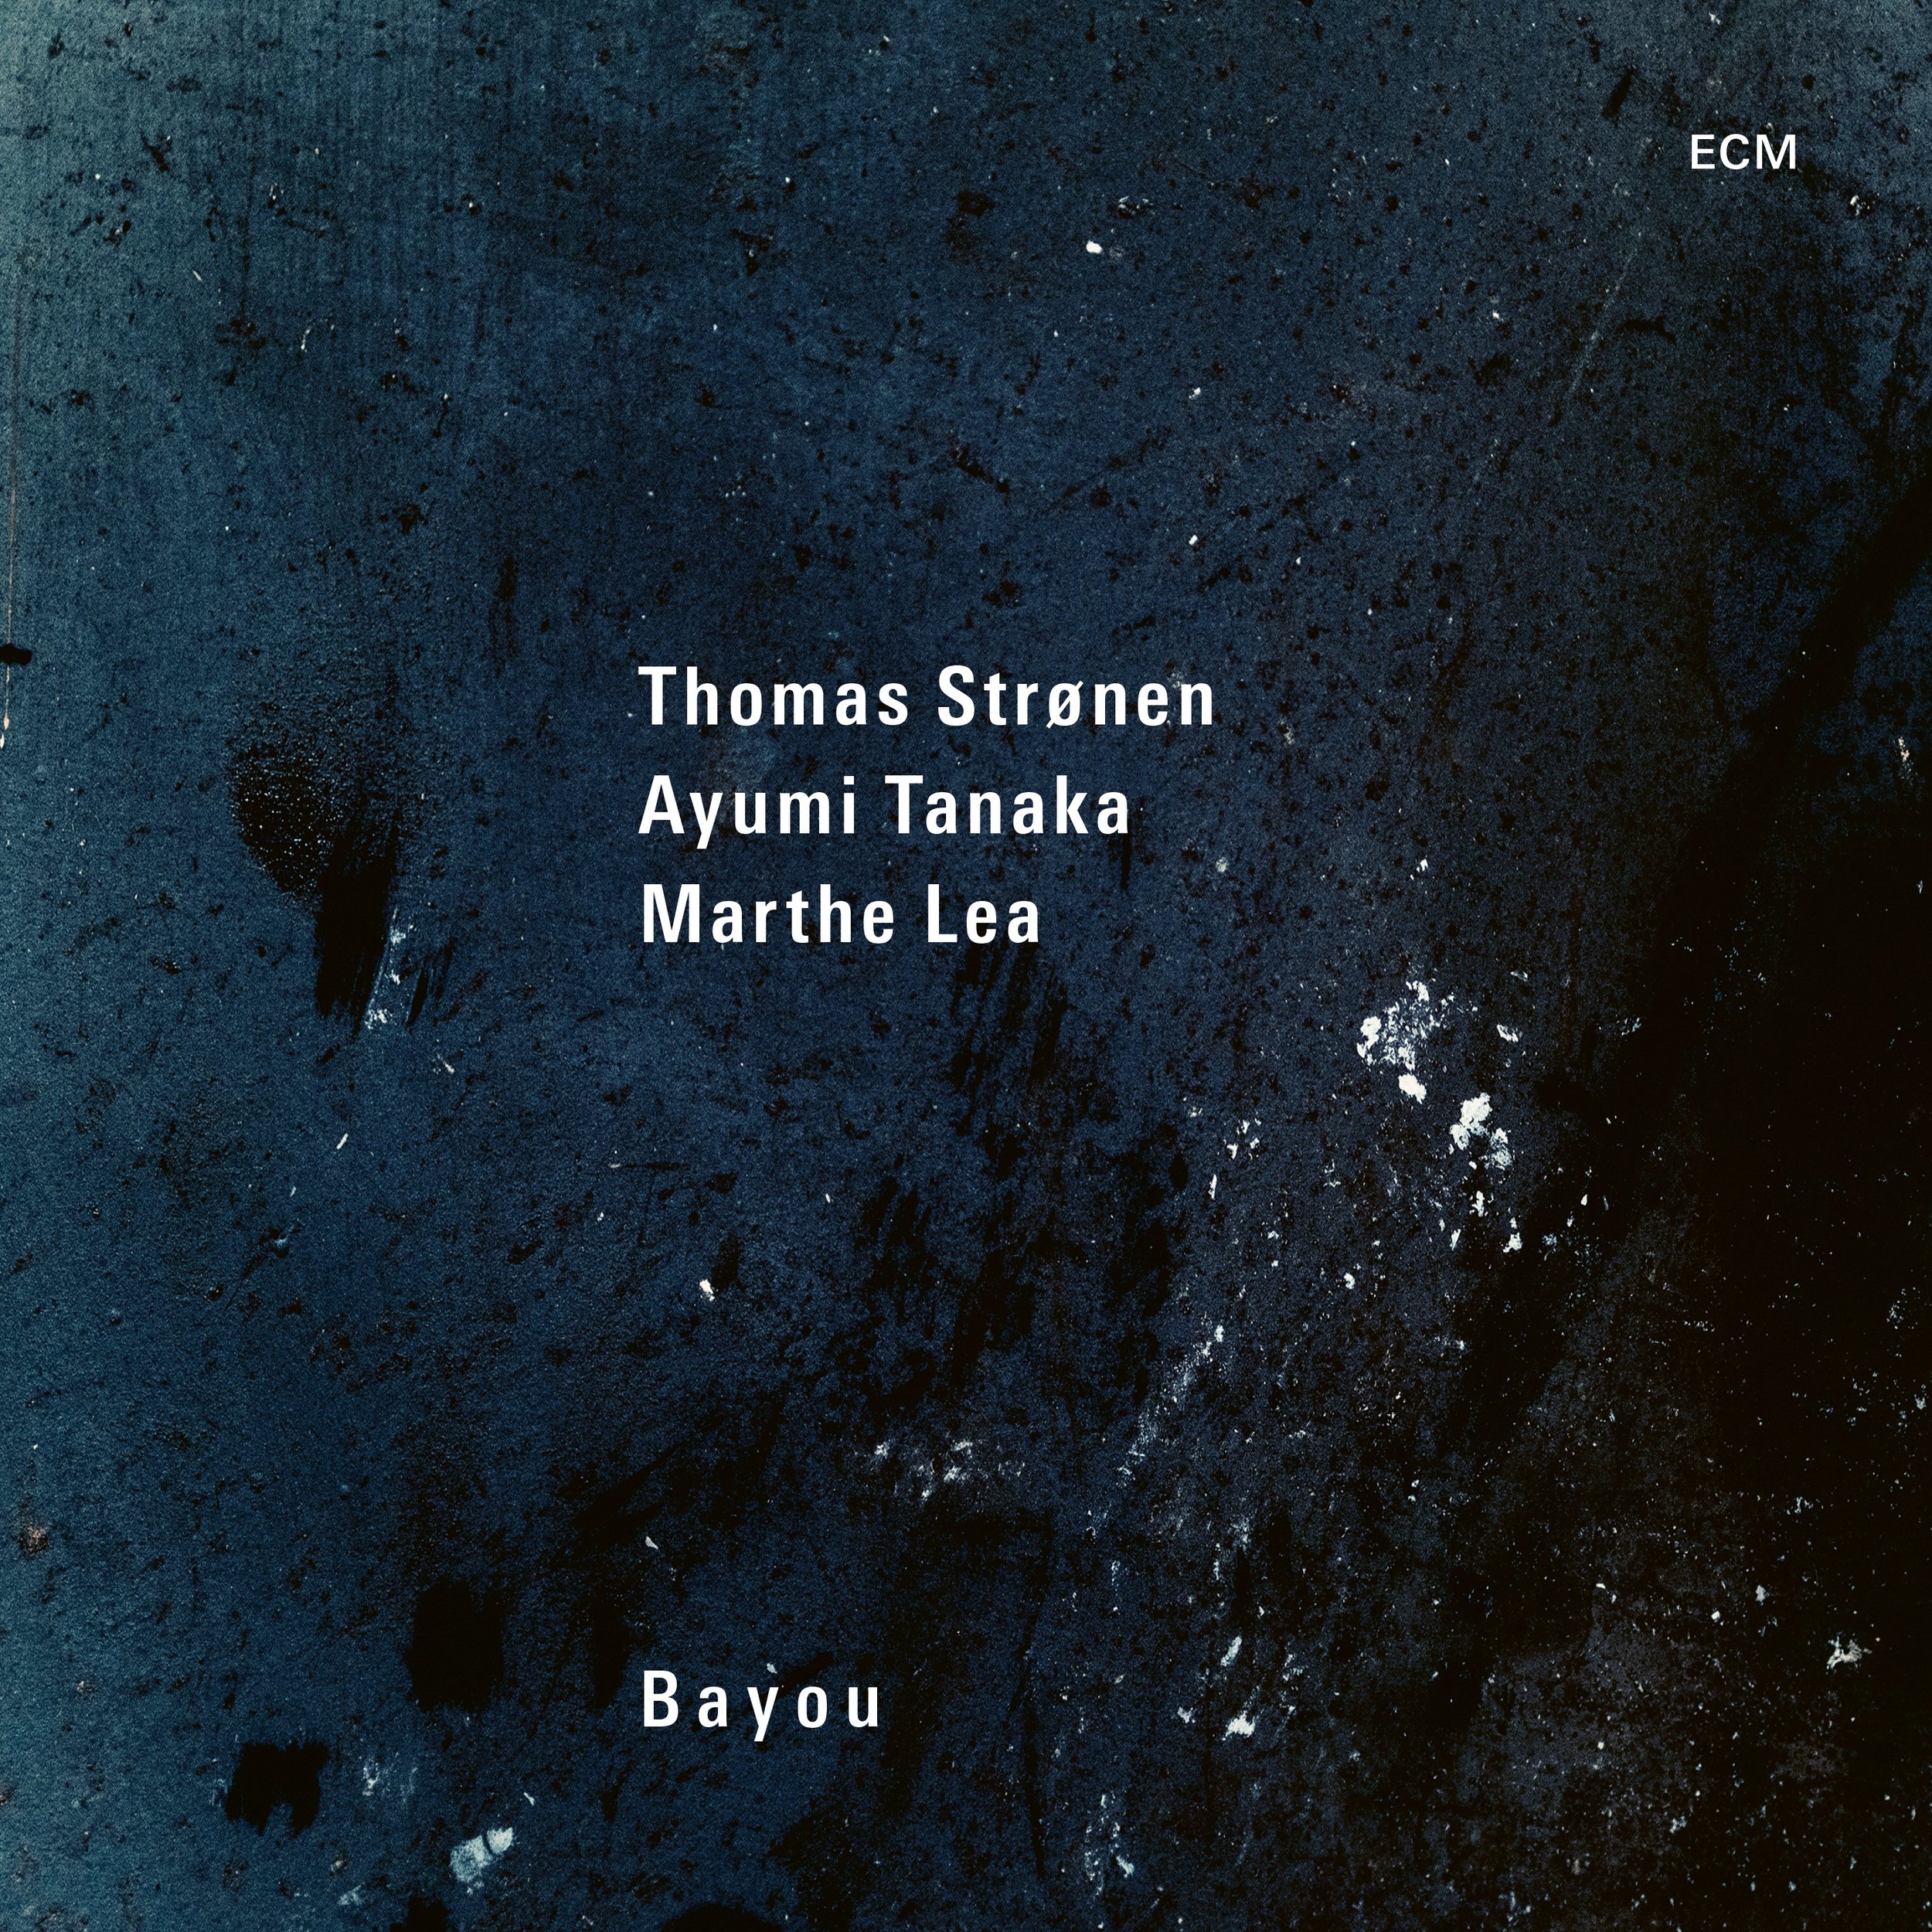    BAYOU       ECM Records     Thomas Strønen - Drums, Percussion Ayumi Tanaka - Piano Marthe Lea - Clarinet, Vocals, Percussion    A fresh and open music, delicate and space-conscious, is shaped as drummer Thomas Strønen and Ayumi Tanaka, previously